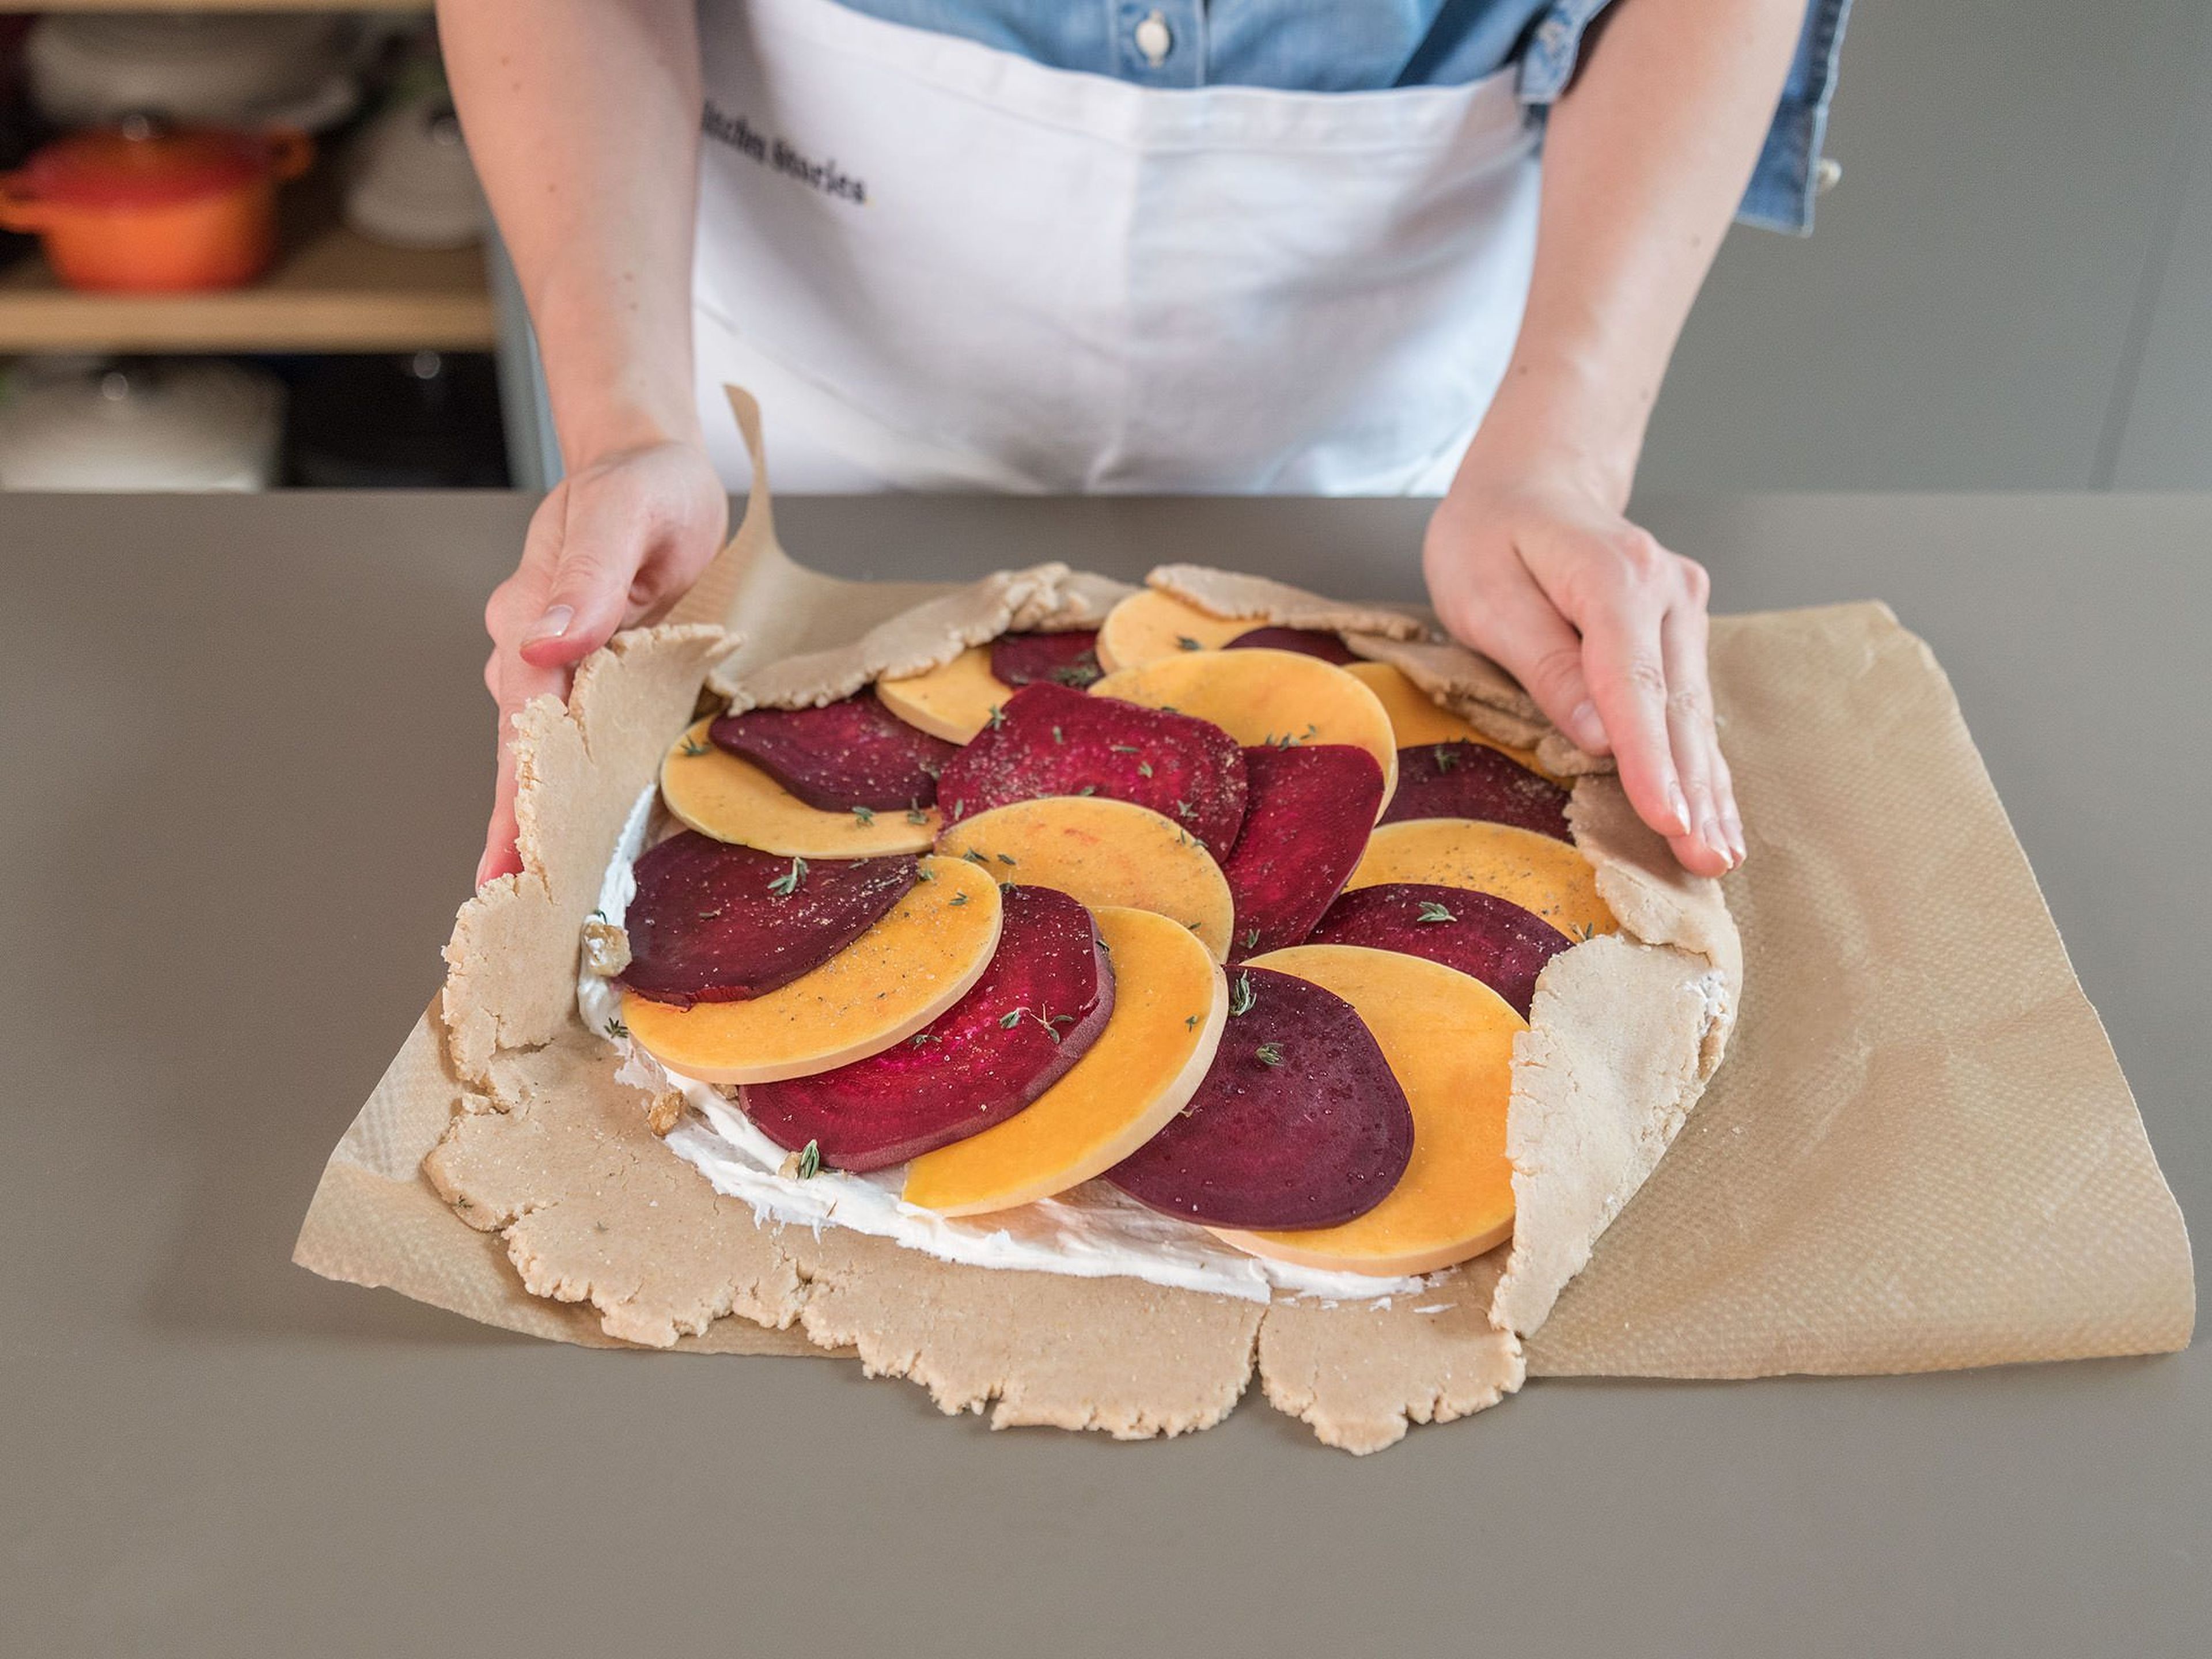 Pluck thyme leaves from stems and sprinkle half over the dough. Assemble the squash and beetroot slices over the goat cheese and sprinkle remaining thyme and salt and pepper over everything. Carefully fold over edges of dough.